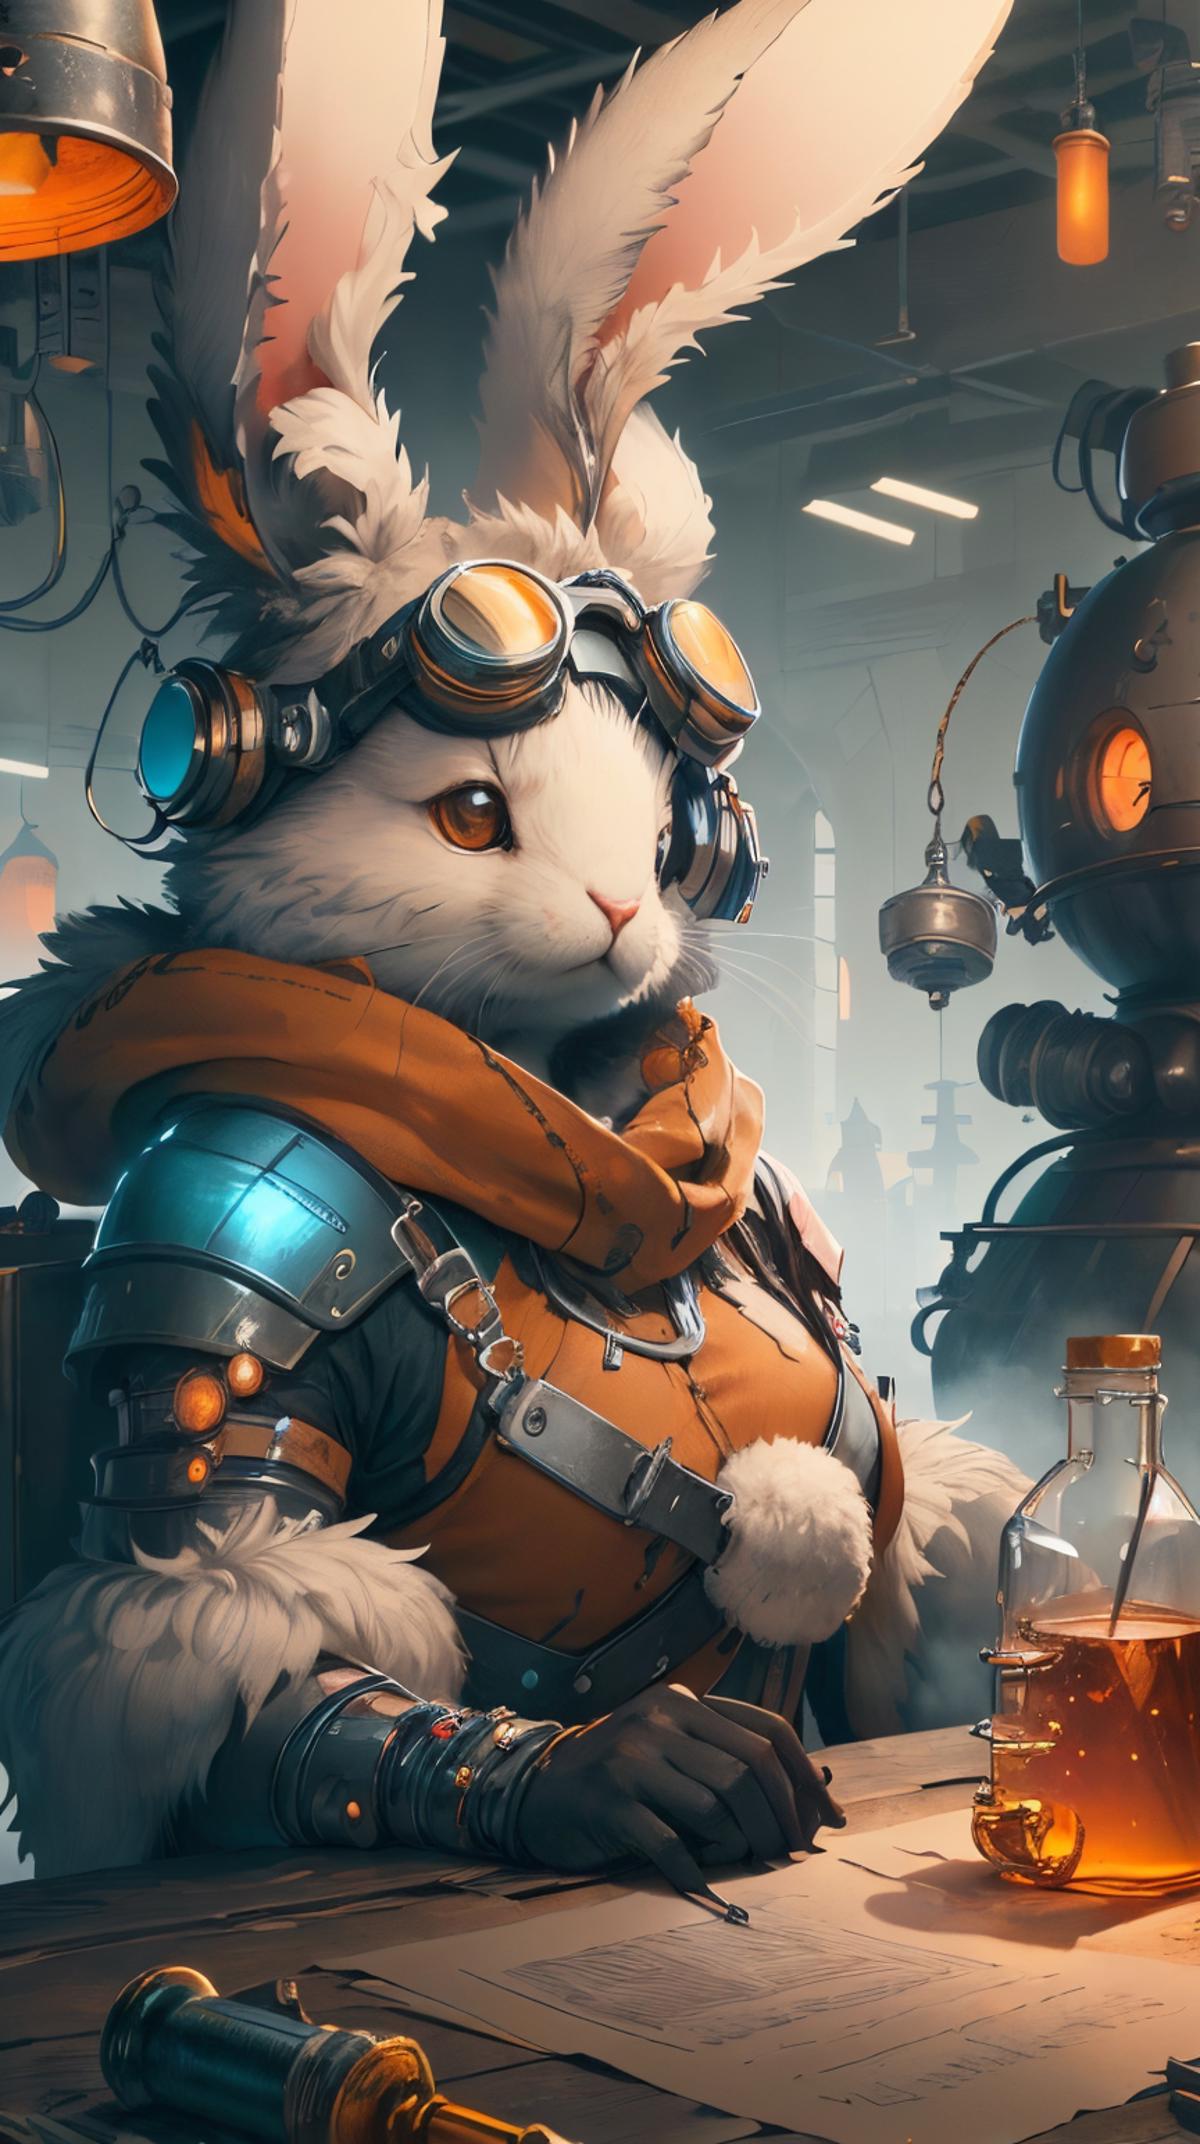 Bunny tech - World Morph image by mnemic